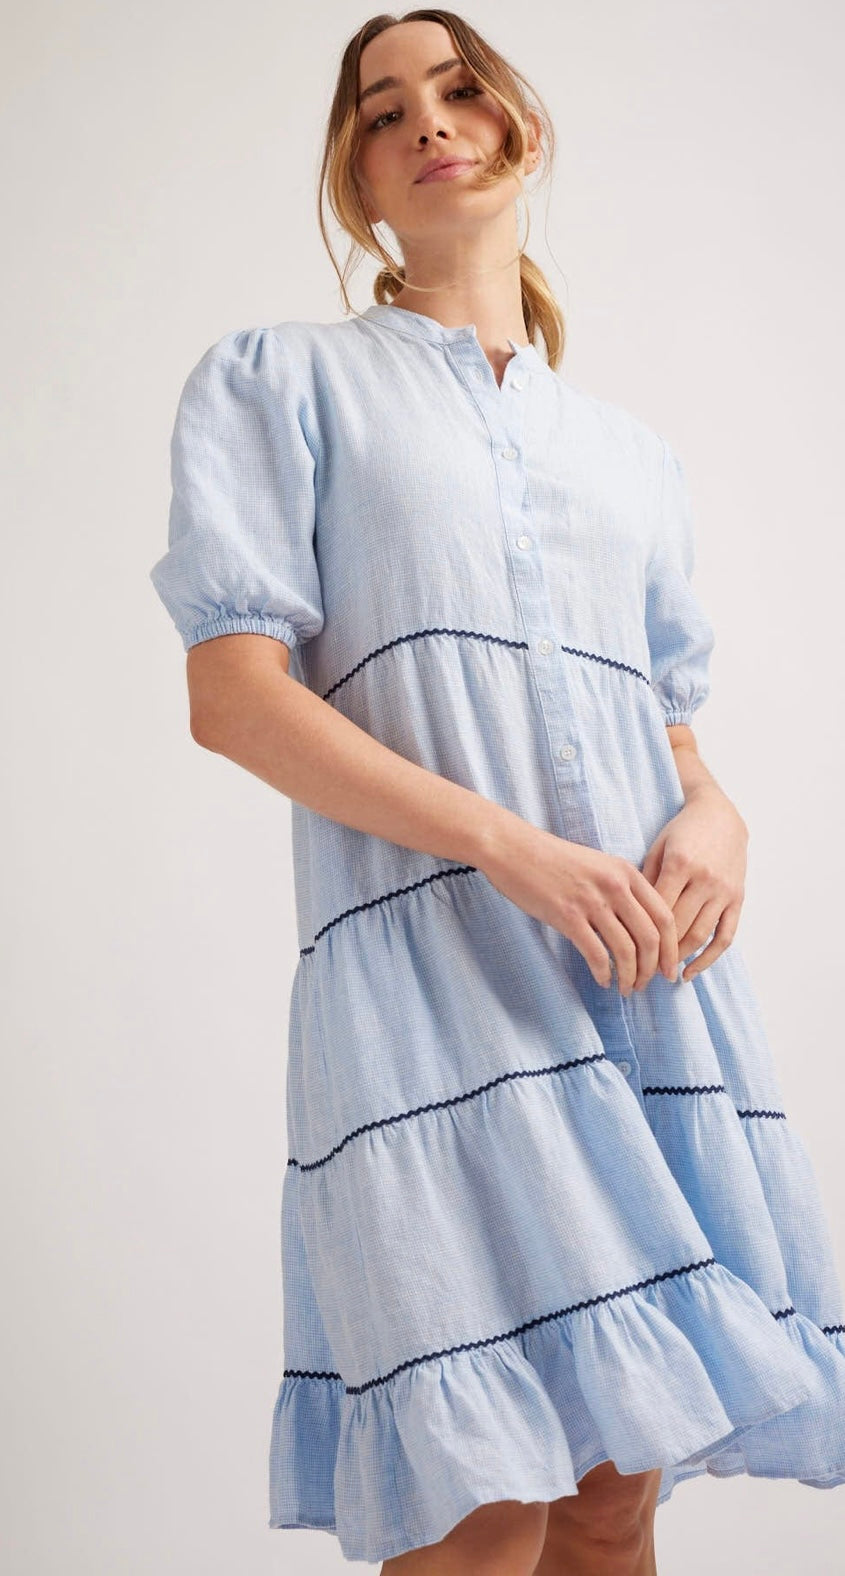 Alessandra Marcella Linen Dress in Pale Blue Houndstooth